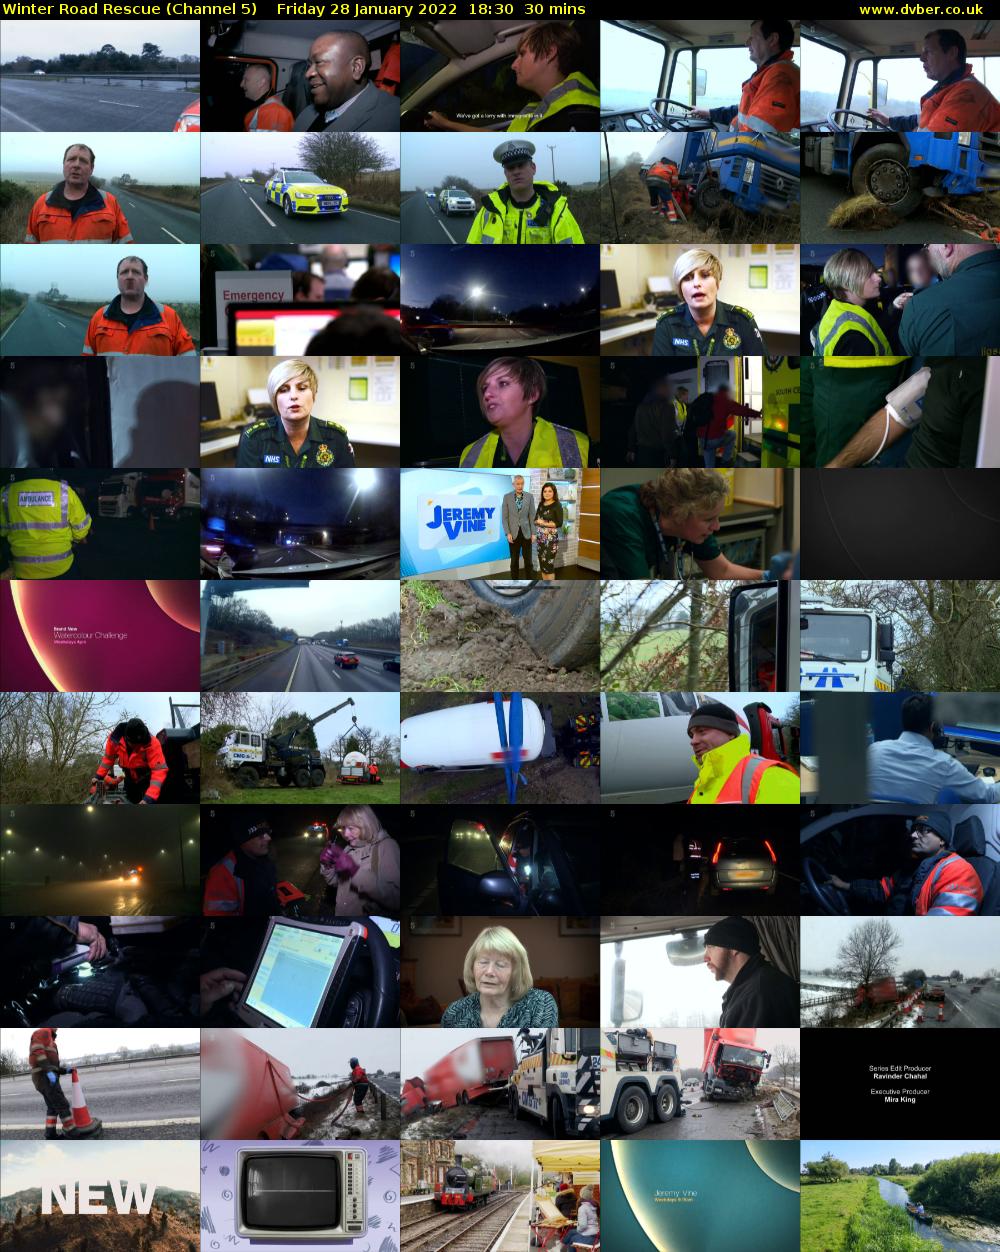 Winter Road Rescue (Channel 5) Friday 28 January 2022 18:30 - 19:00